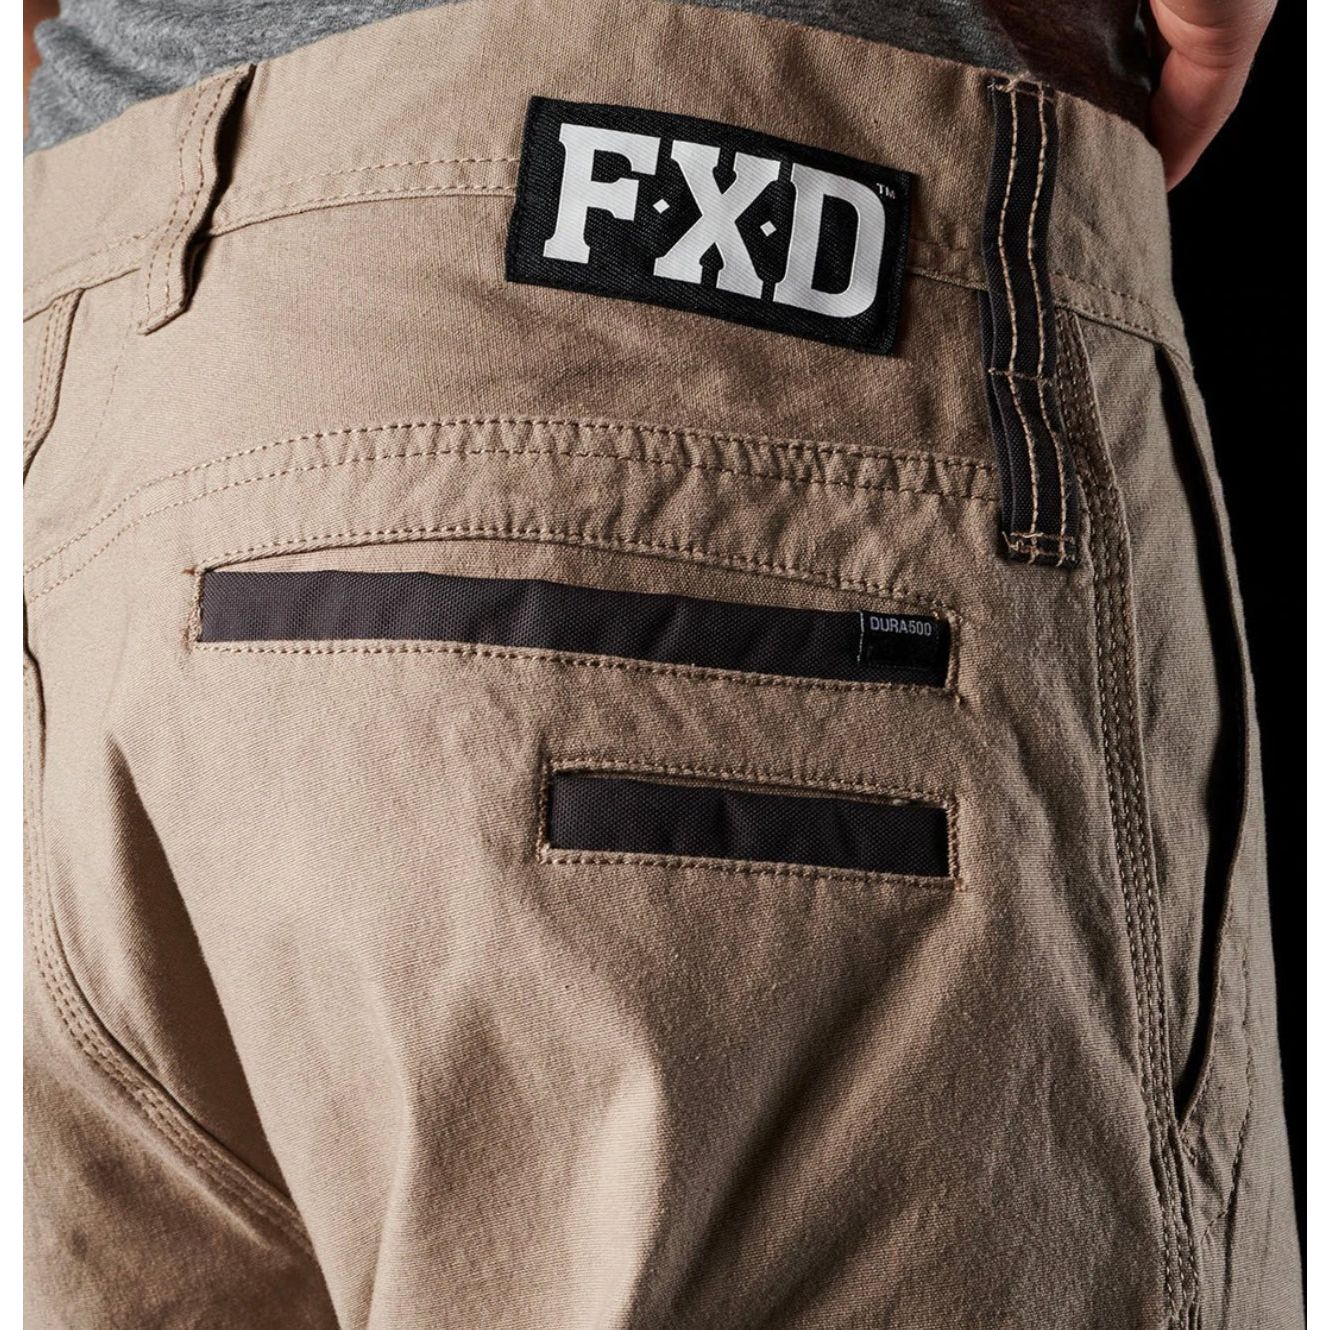 FXD WP-4 Cuffed Work Pants